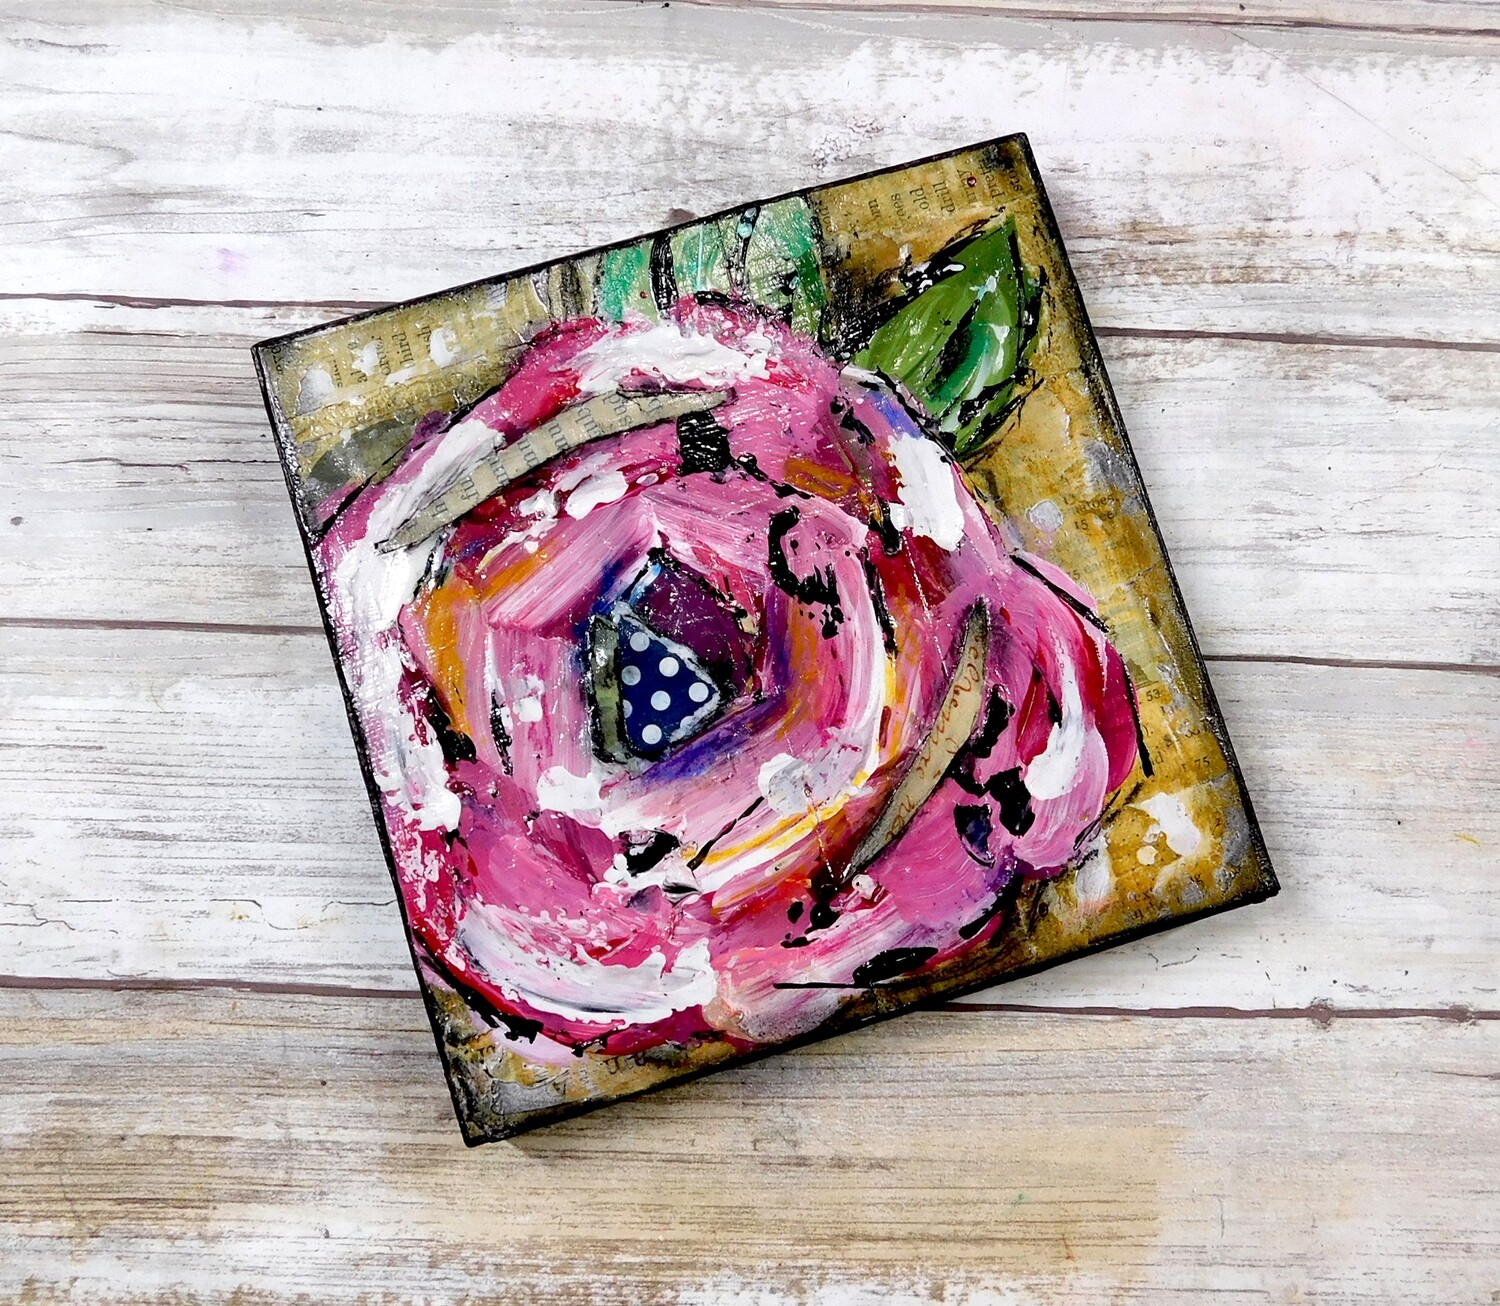 Collage flowers 5 large pink with polka dot 6x6 mixed media original clearance